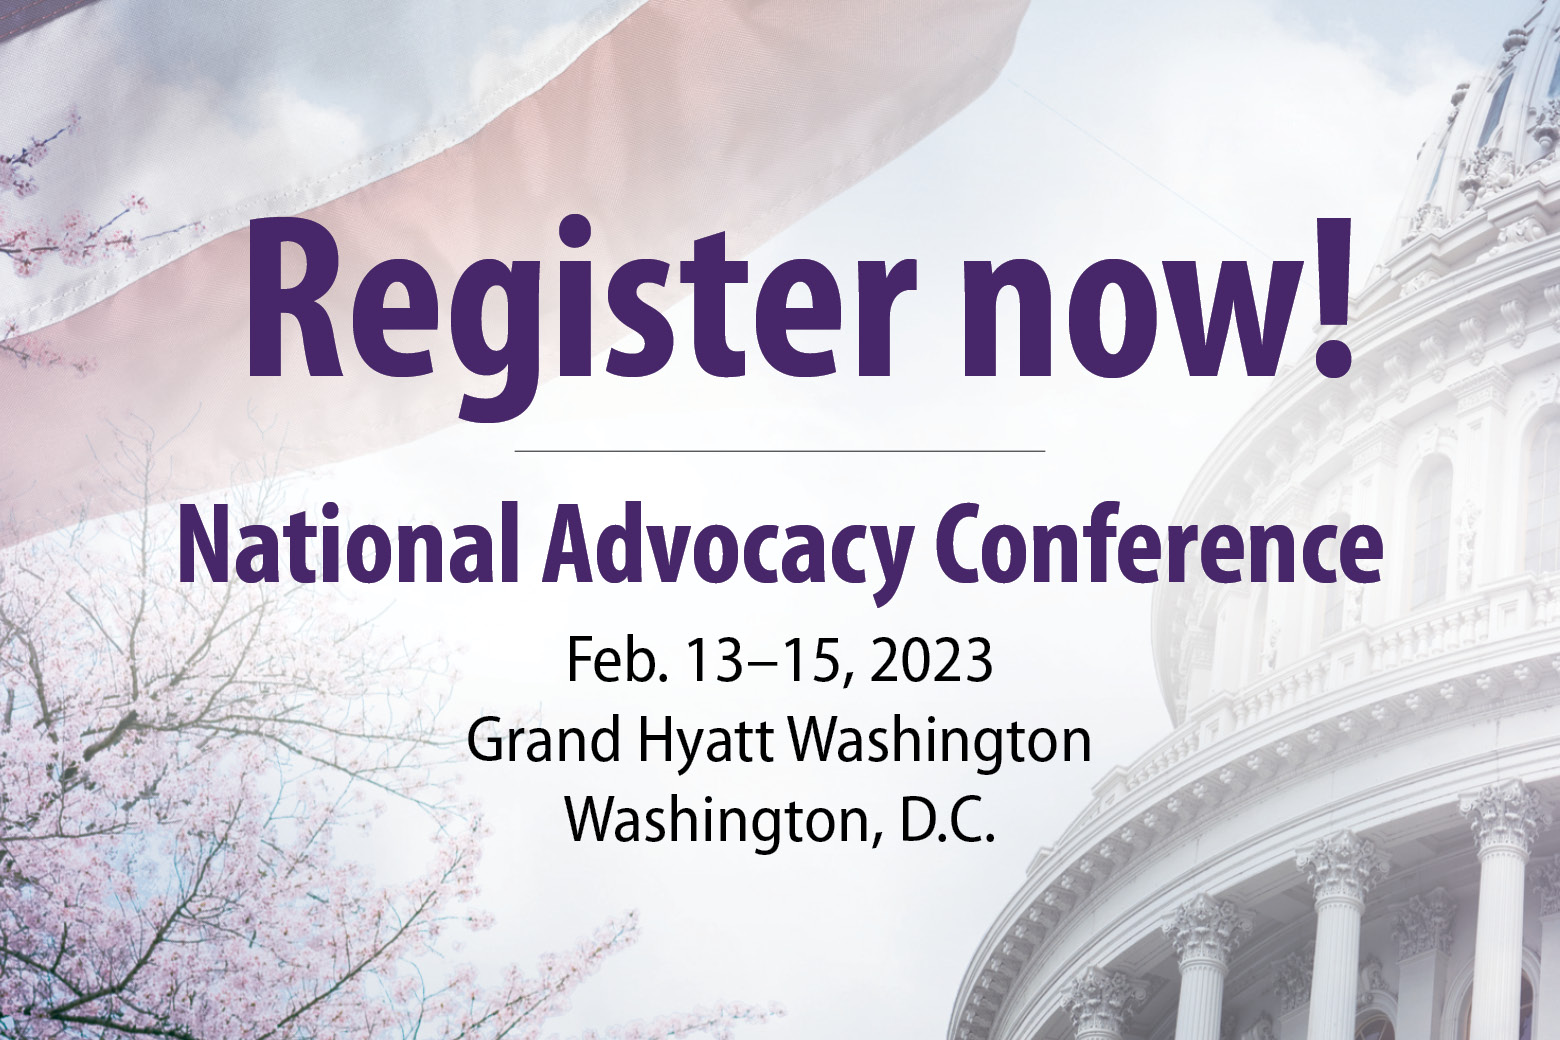 National Advocacy Conference: 2023 Register